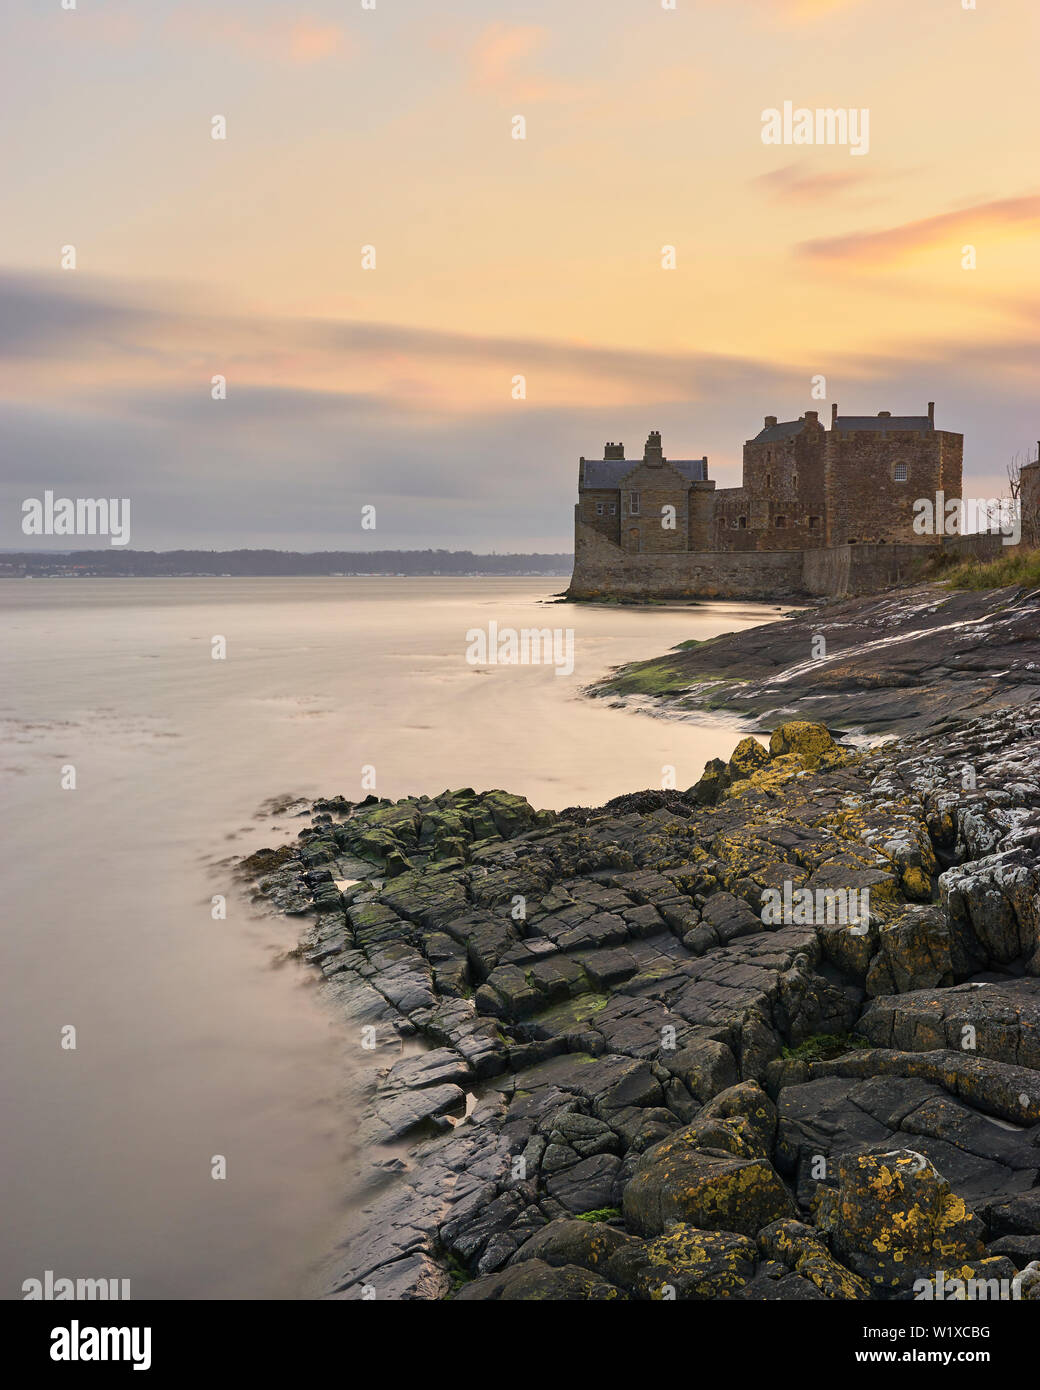 Blackness Castle, Falkirk, Scotland.  On the shore of the Firth of Forth at sunrise Stock Photo